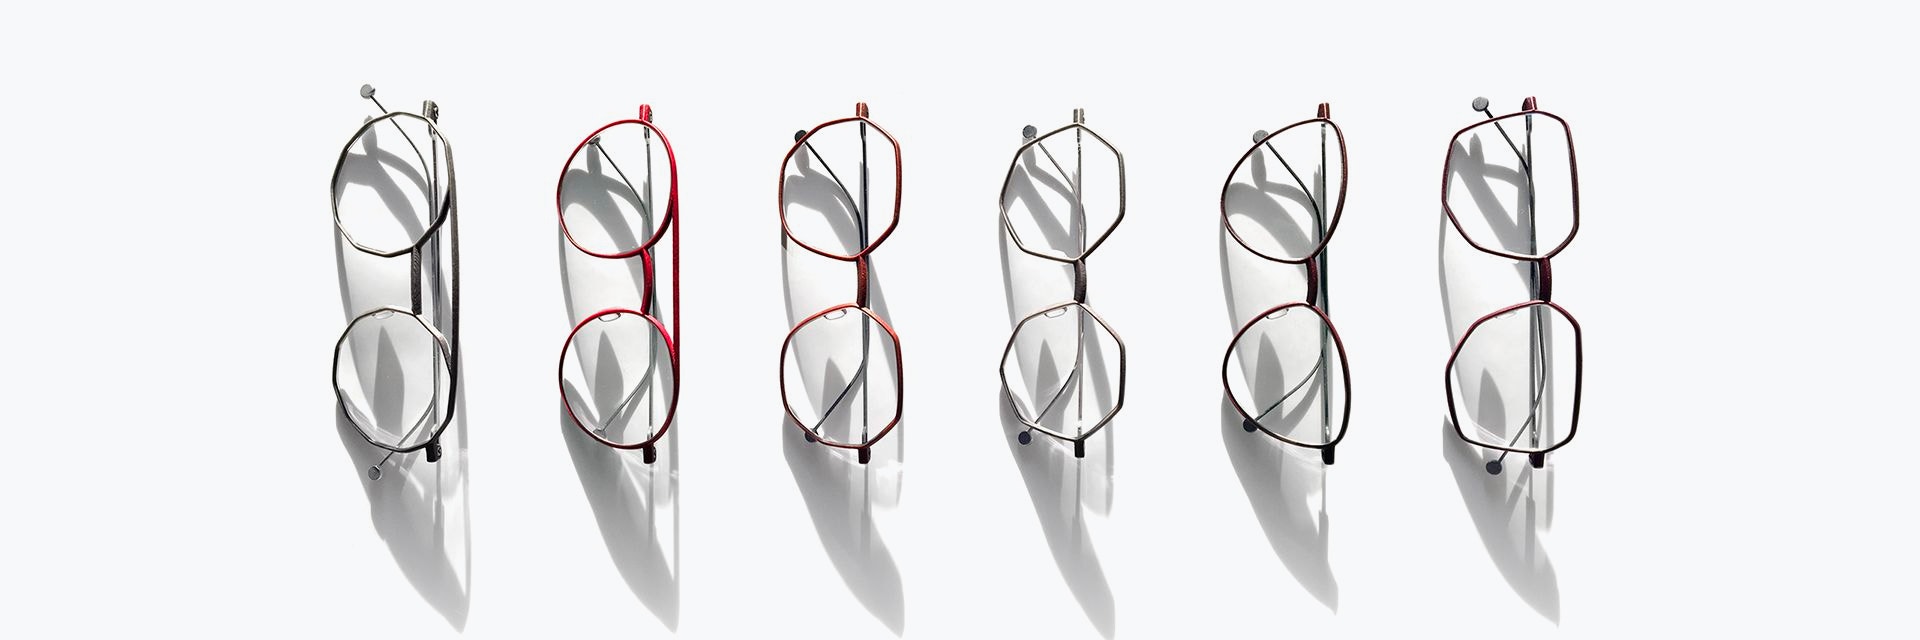 Row of eyeglasses from NEON Berling in different shapes and colors